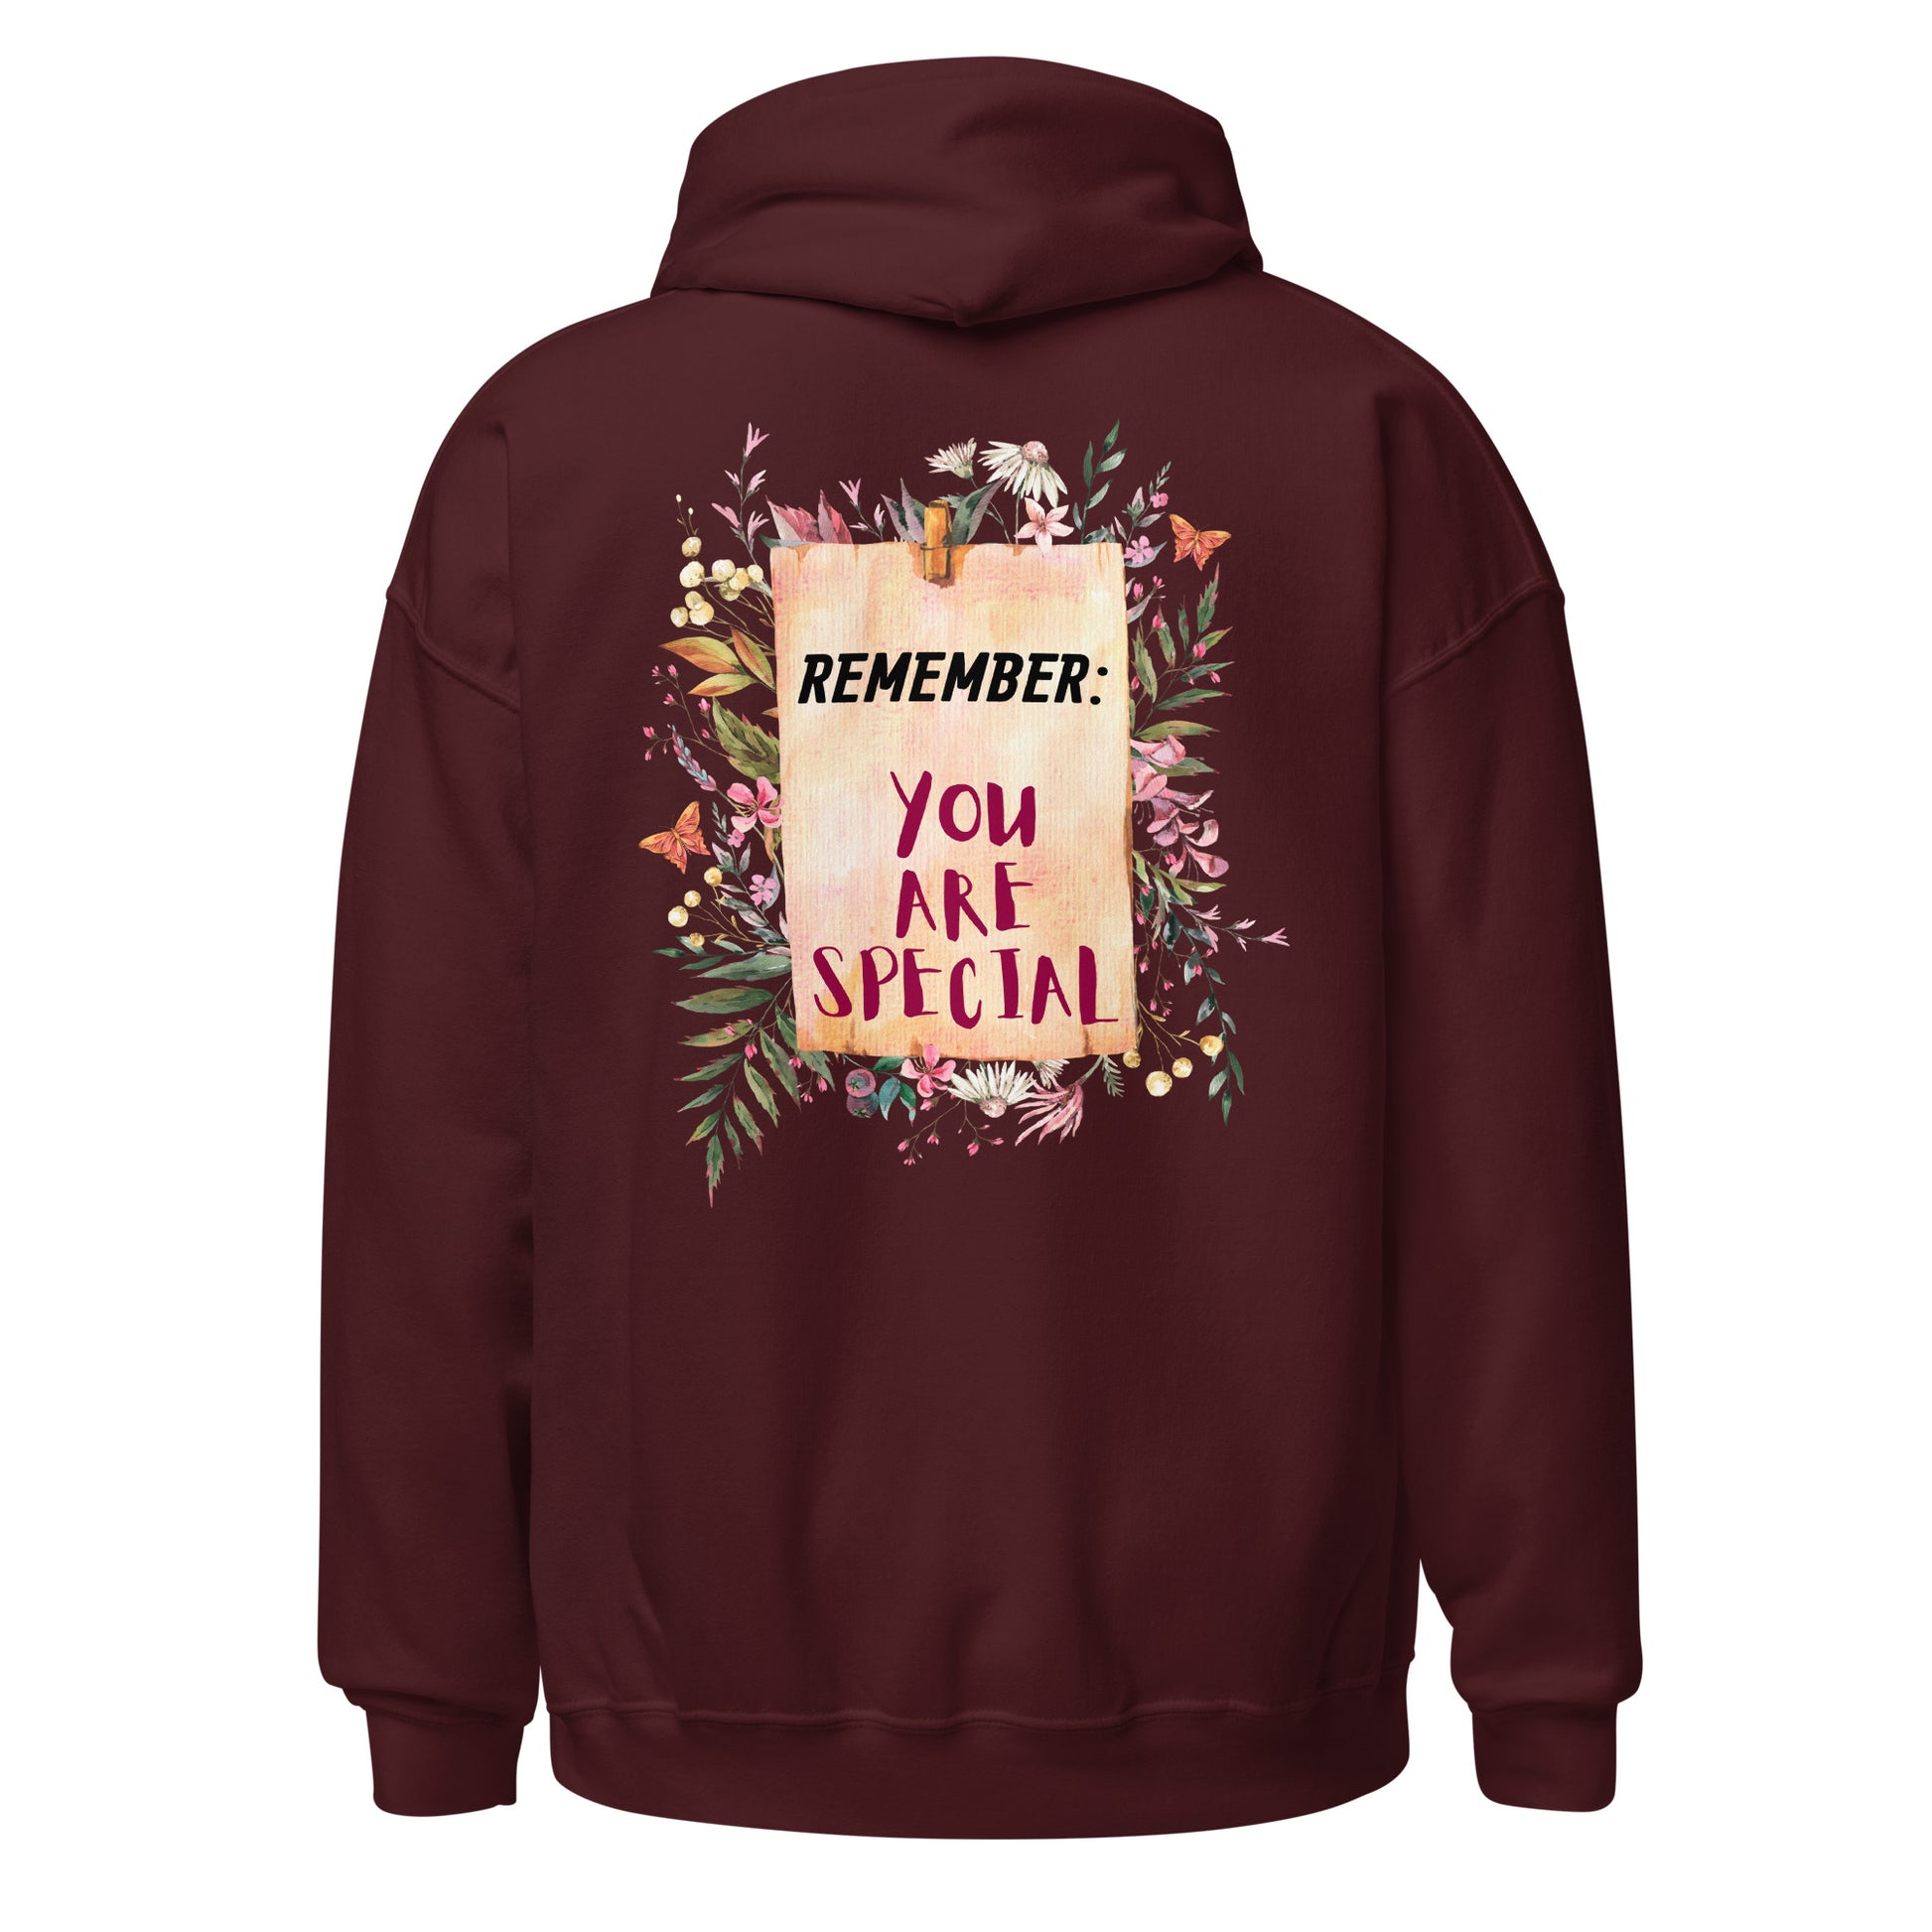 Inspirational Pullover Hoodie featuring the powerful affirmation, "Remember: You Are Special." The vintage-inspired design, featuring a floral botanical reminder note, adds a touch of timeless elegance to their attire. maroon hoodie